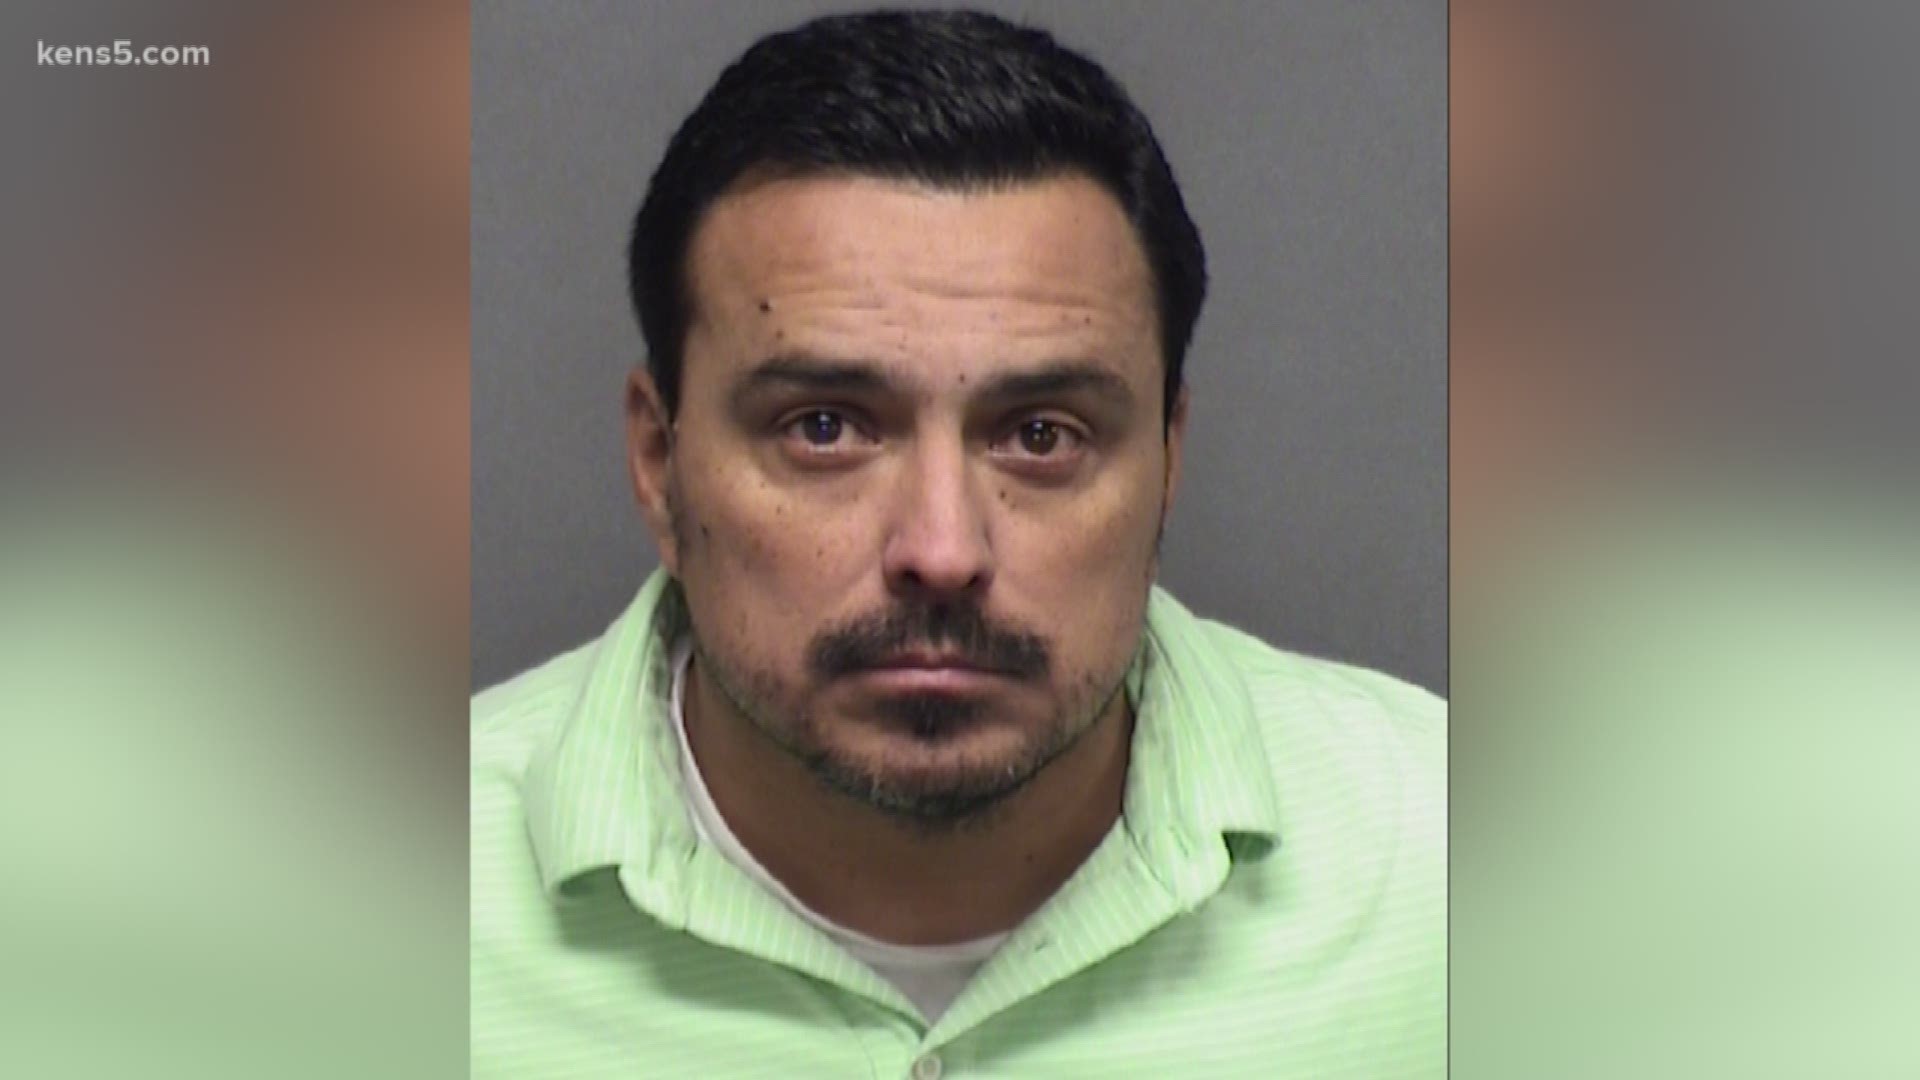 Jose Eduardo Hernandez, 44, is charged with sexual assault of a child.